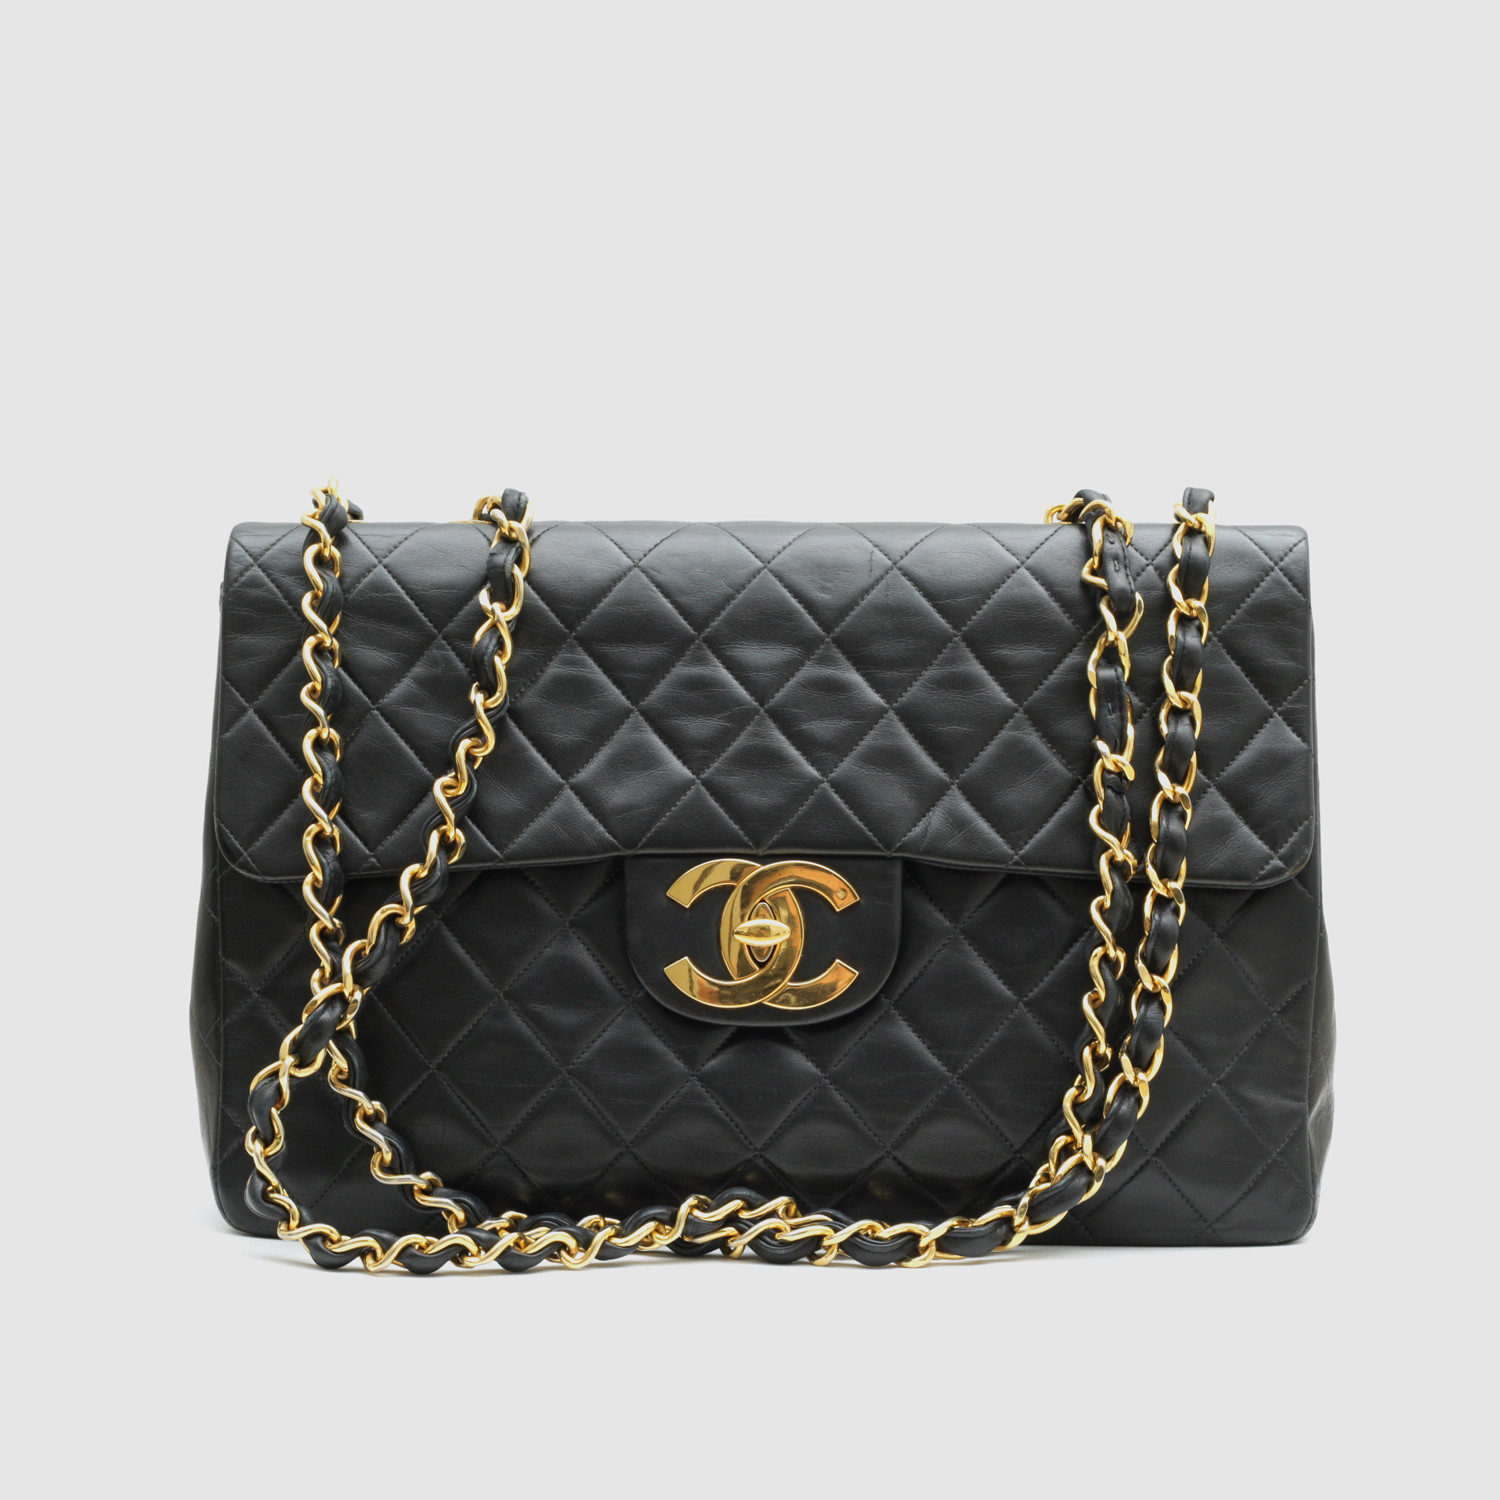 Chanel Classic Large Jumbo Flap Bag // Black Quilted Lambskin - Vintage ...